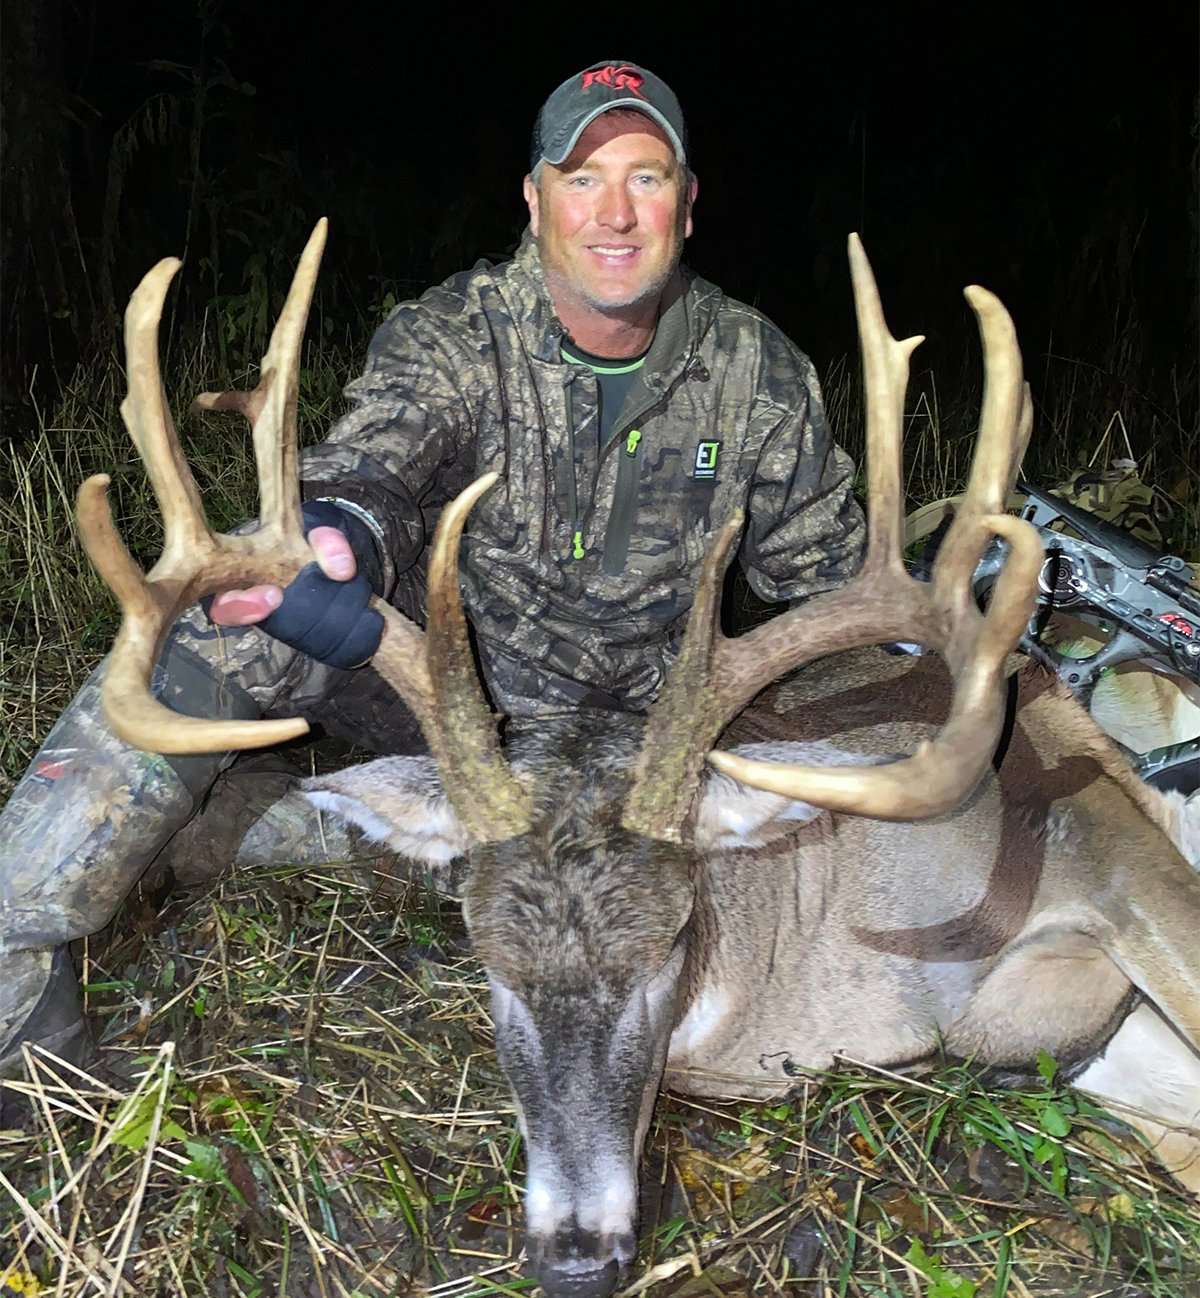 Chris Ward is all smiles with his 180-inch Kansas buck. Image by Red Rising TV